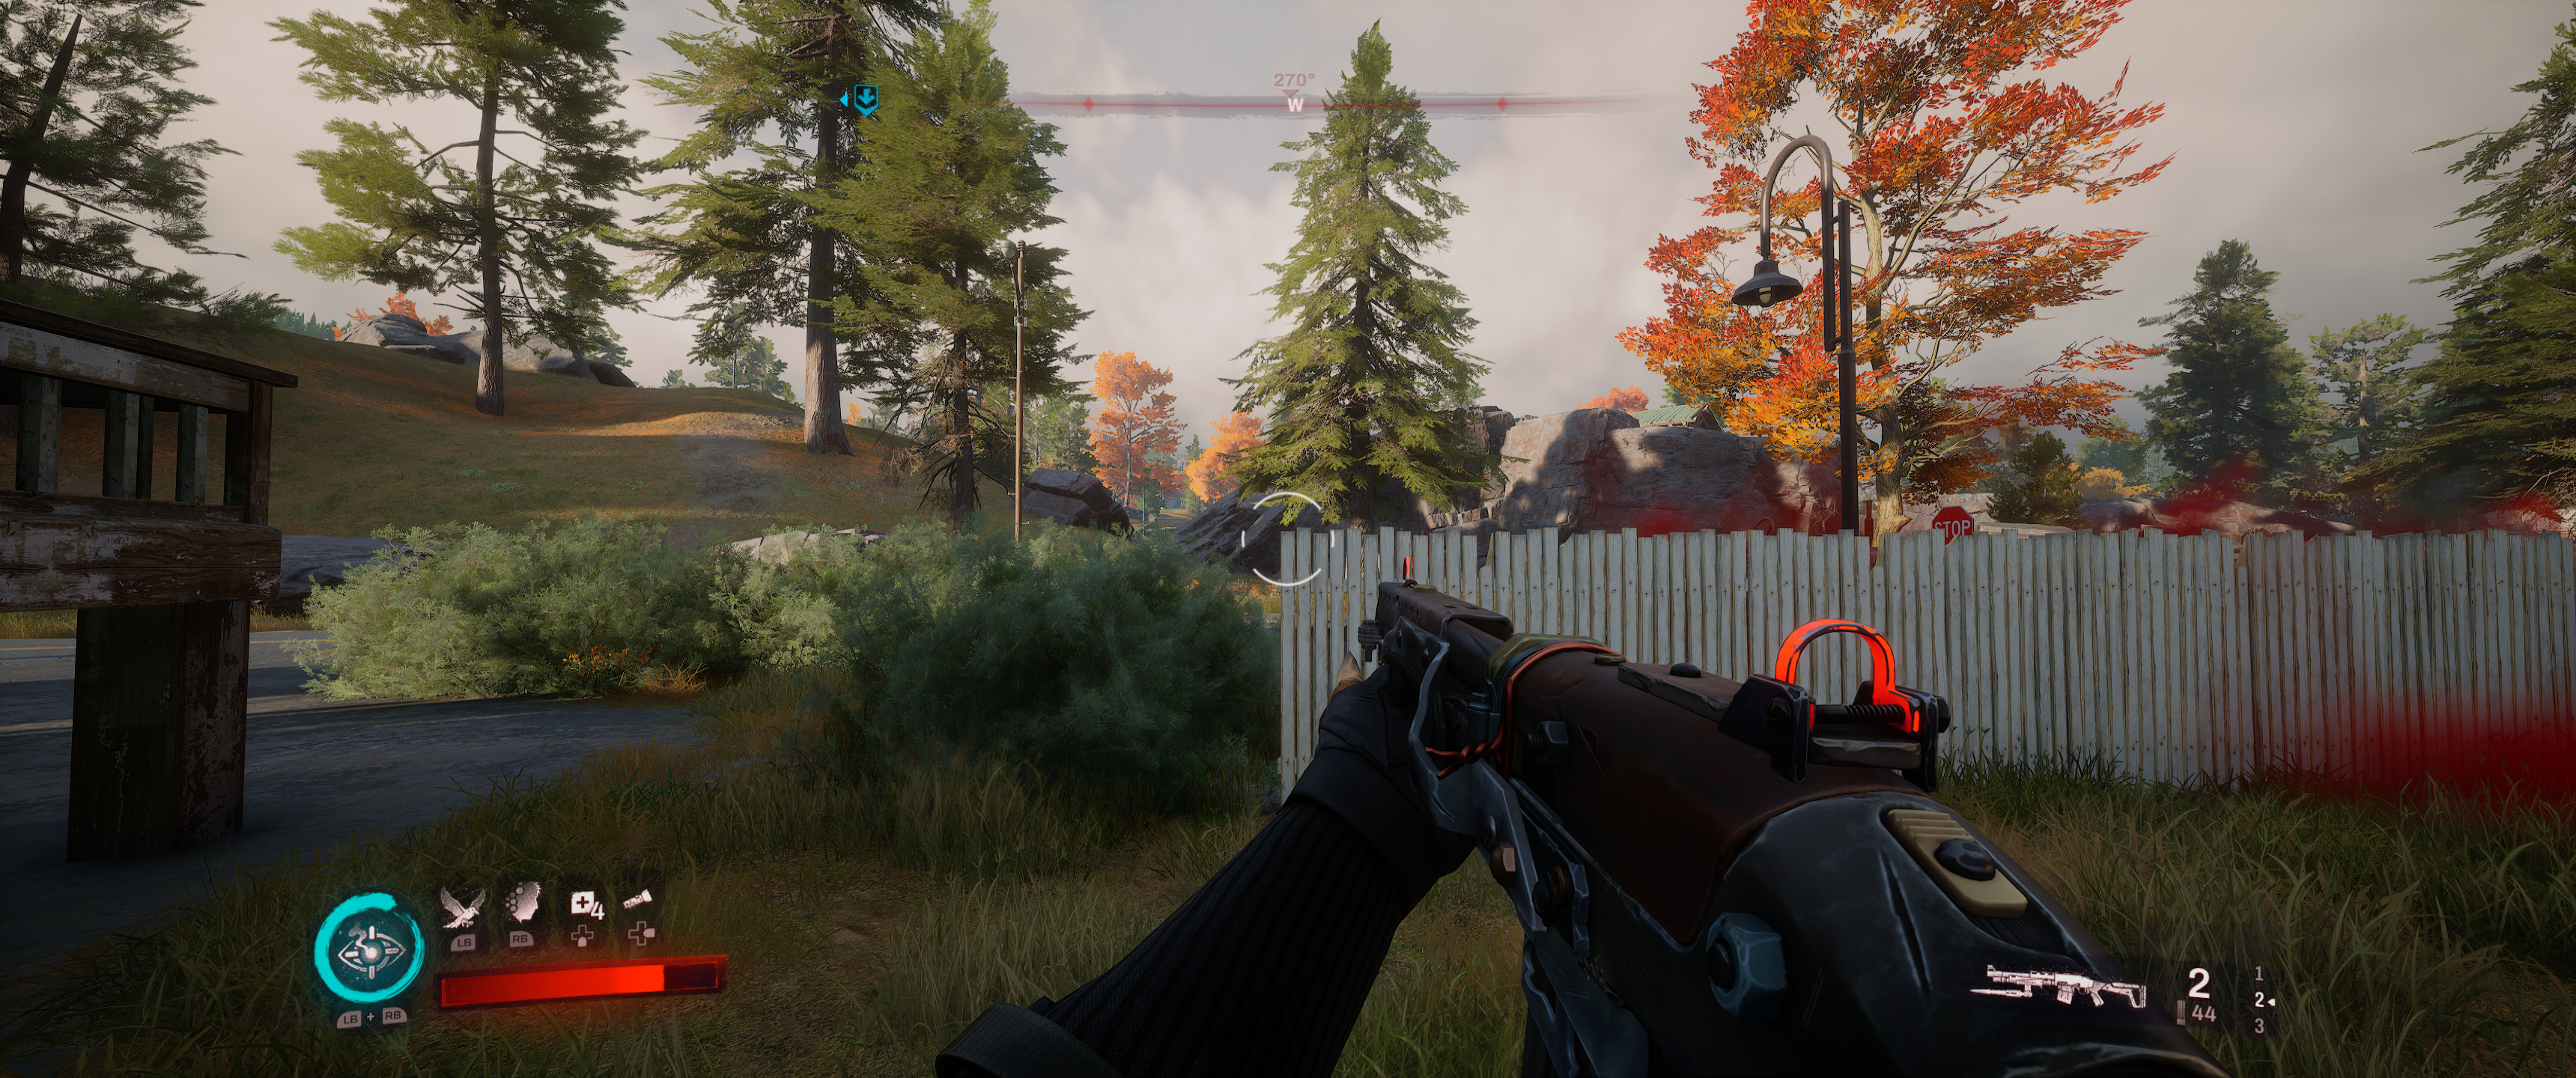 Redfall - Redfall Game Update 2 Release Notes - Steam News